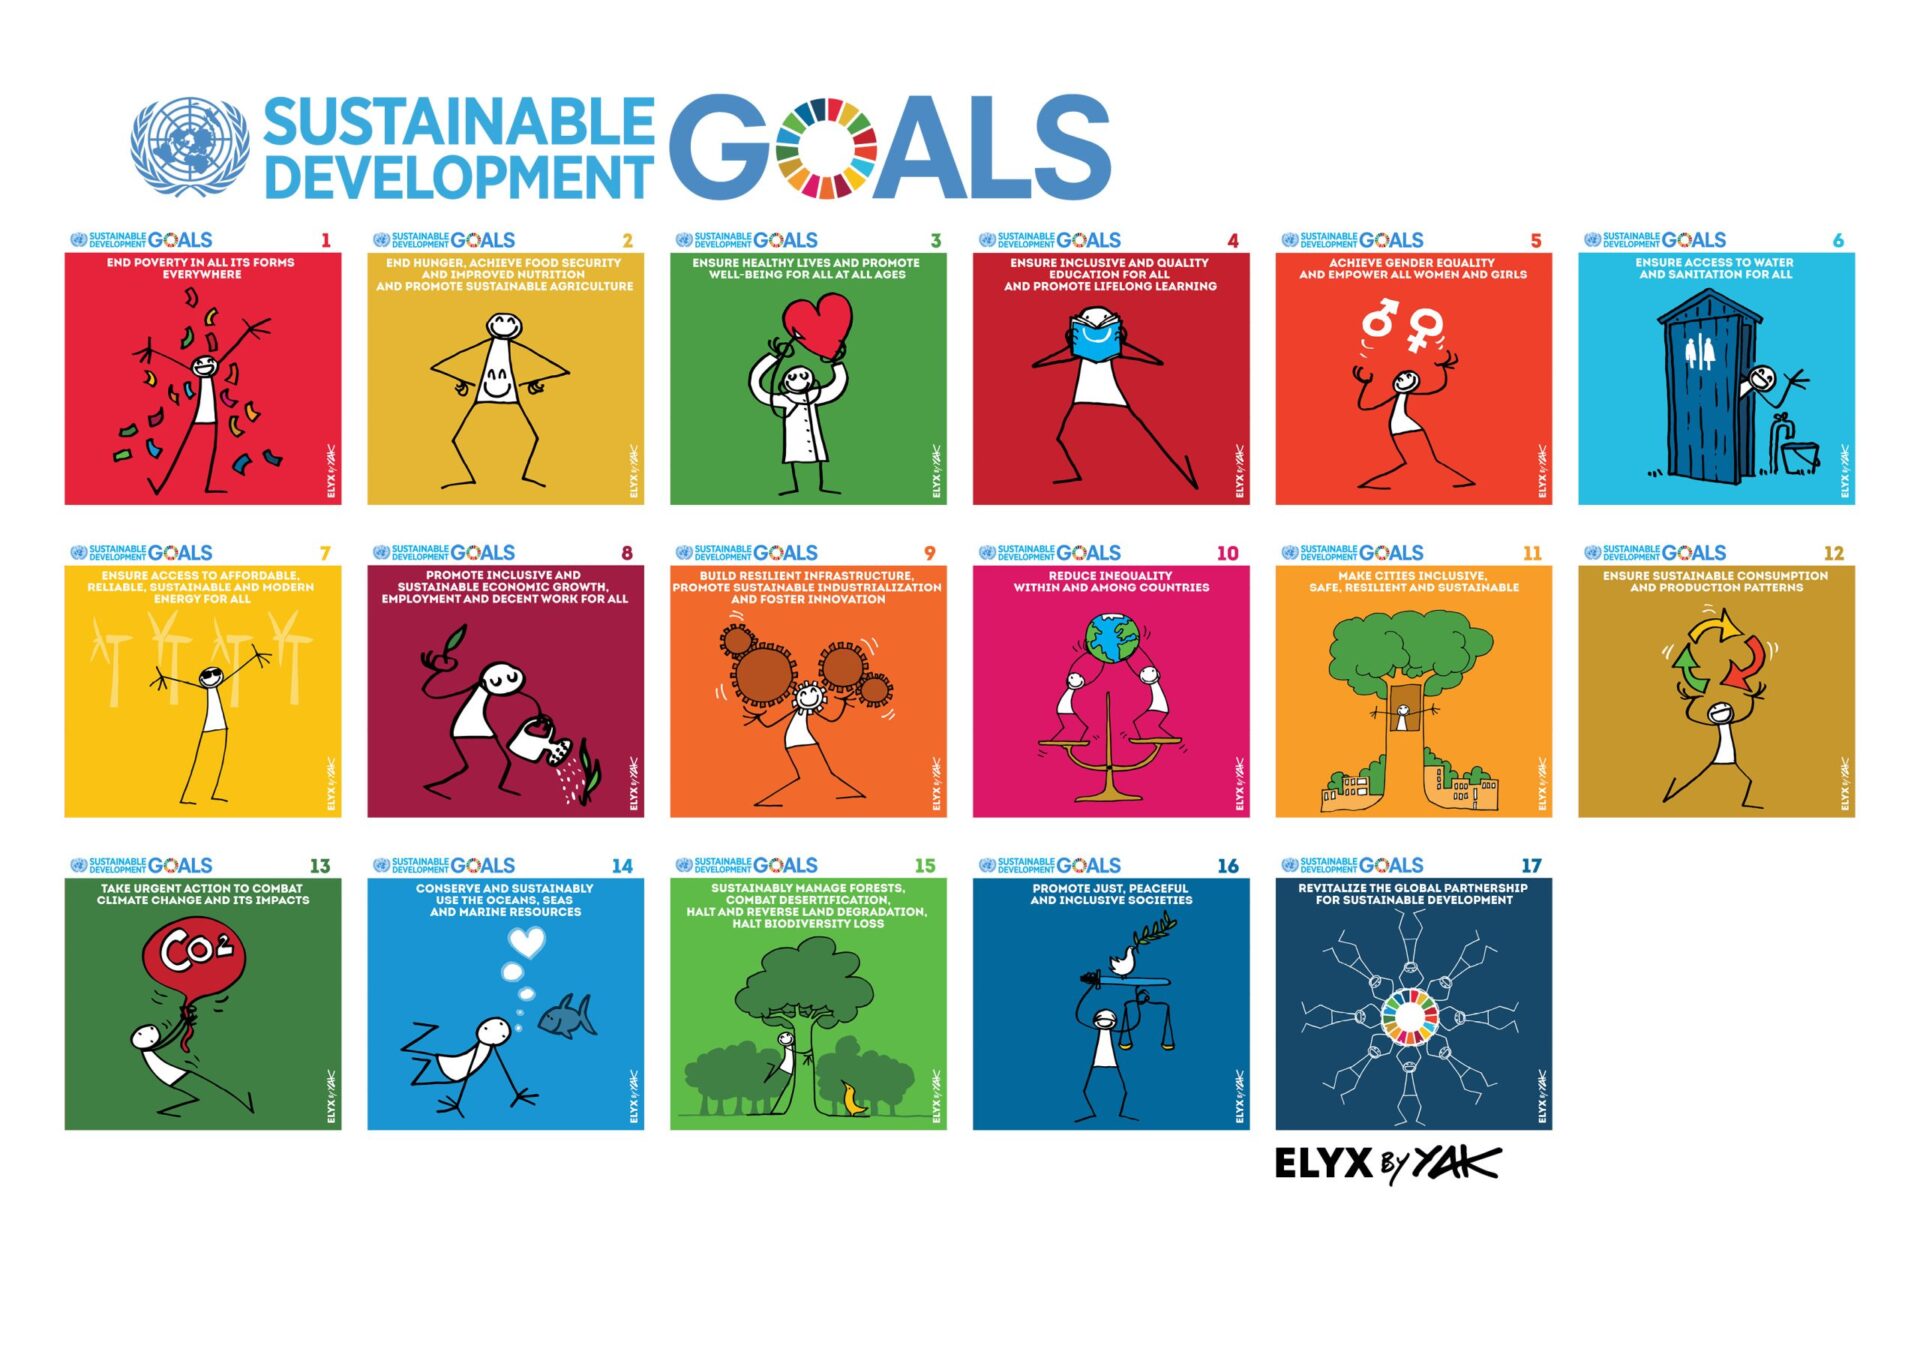 What will you answer when investors ask about SDGs?